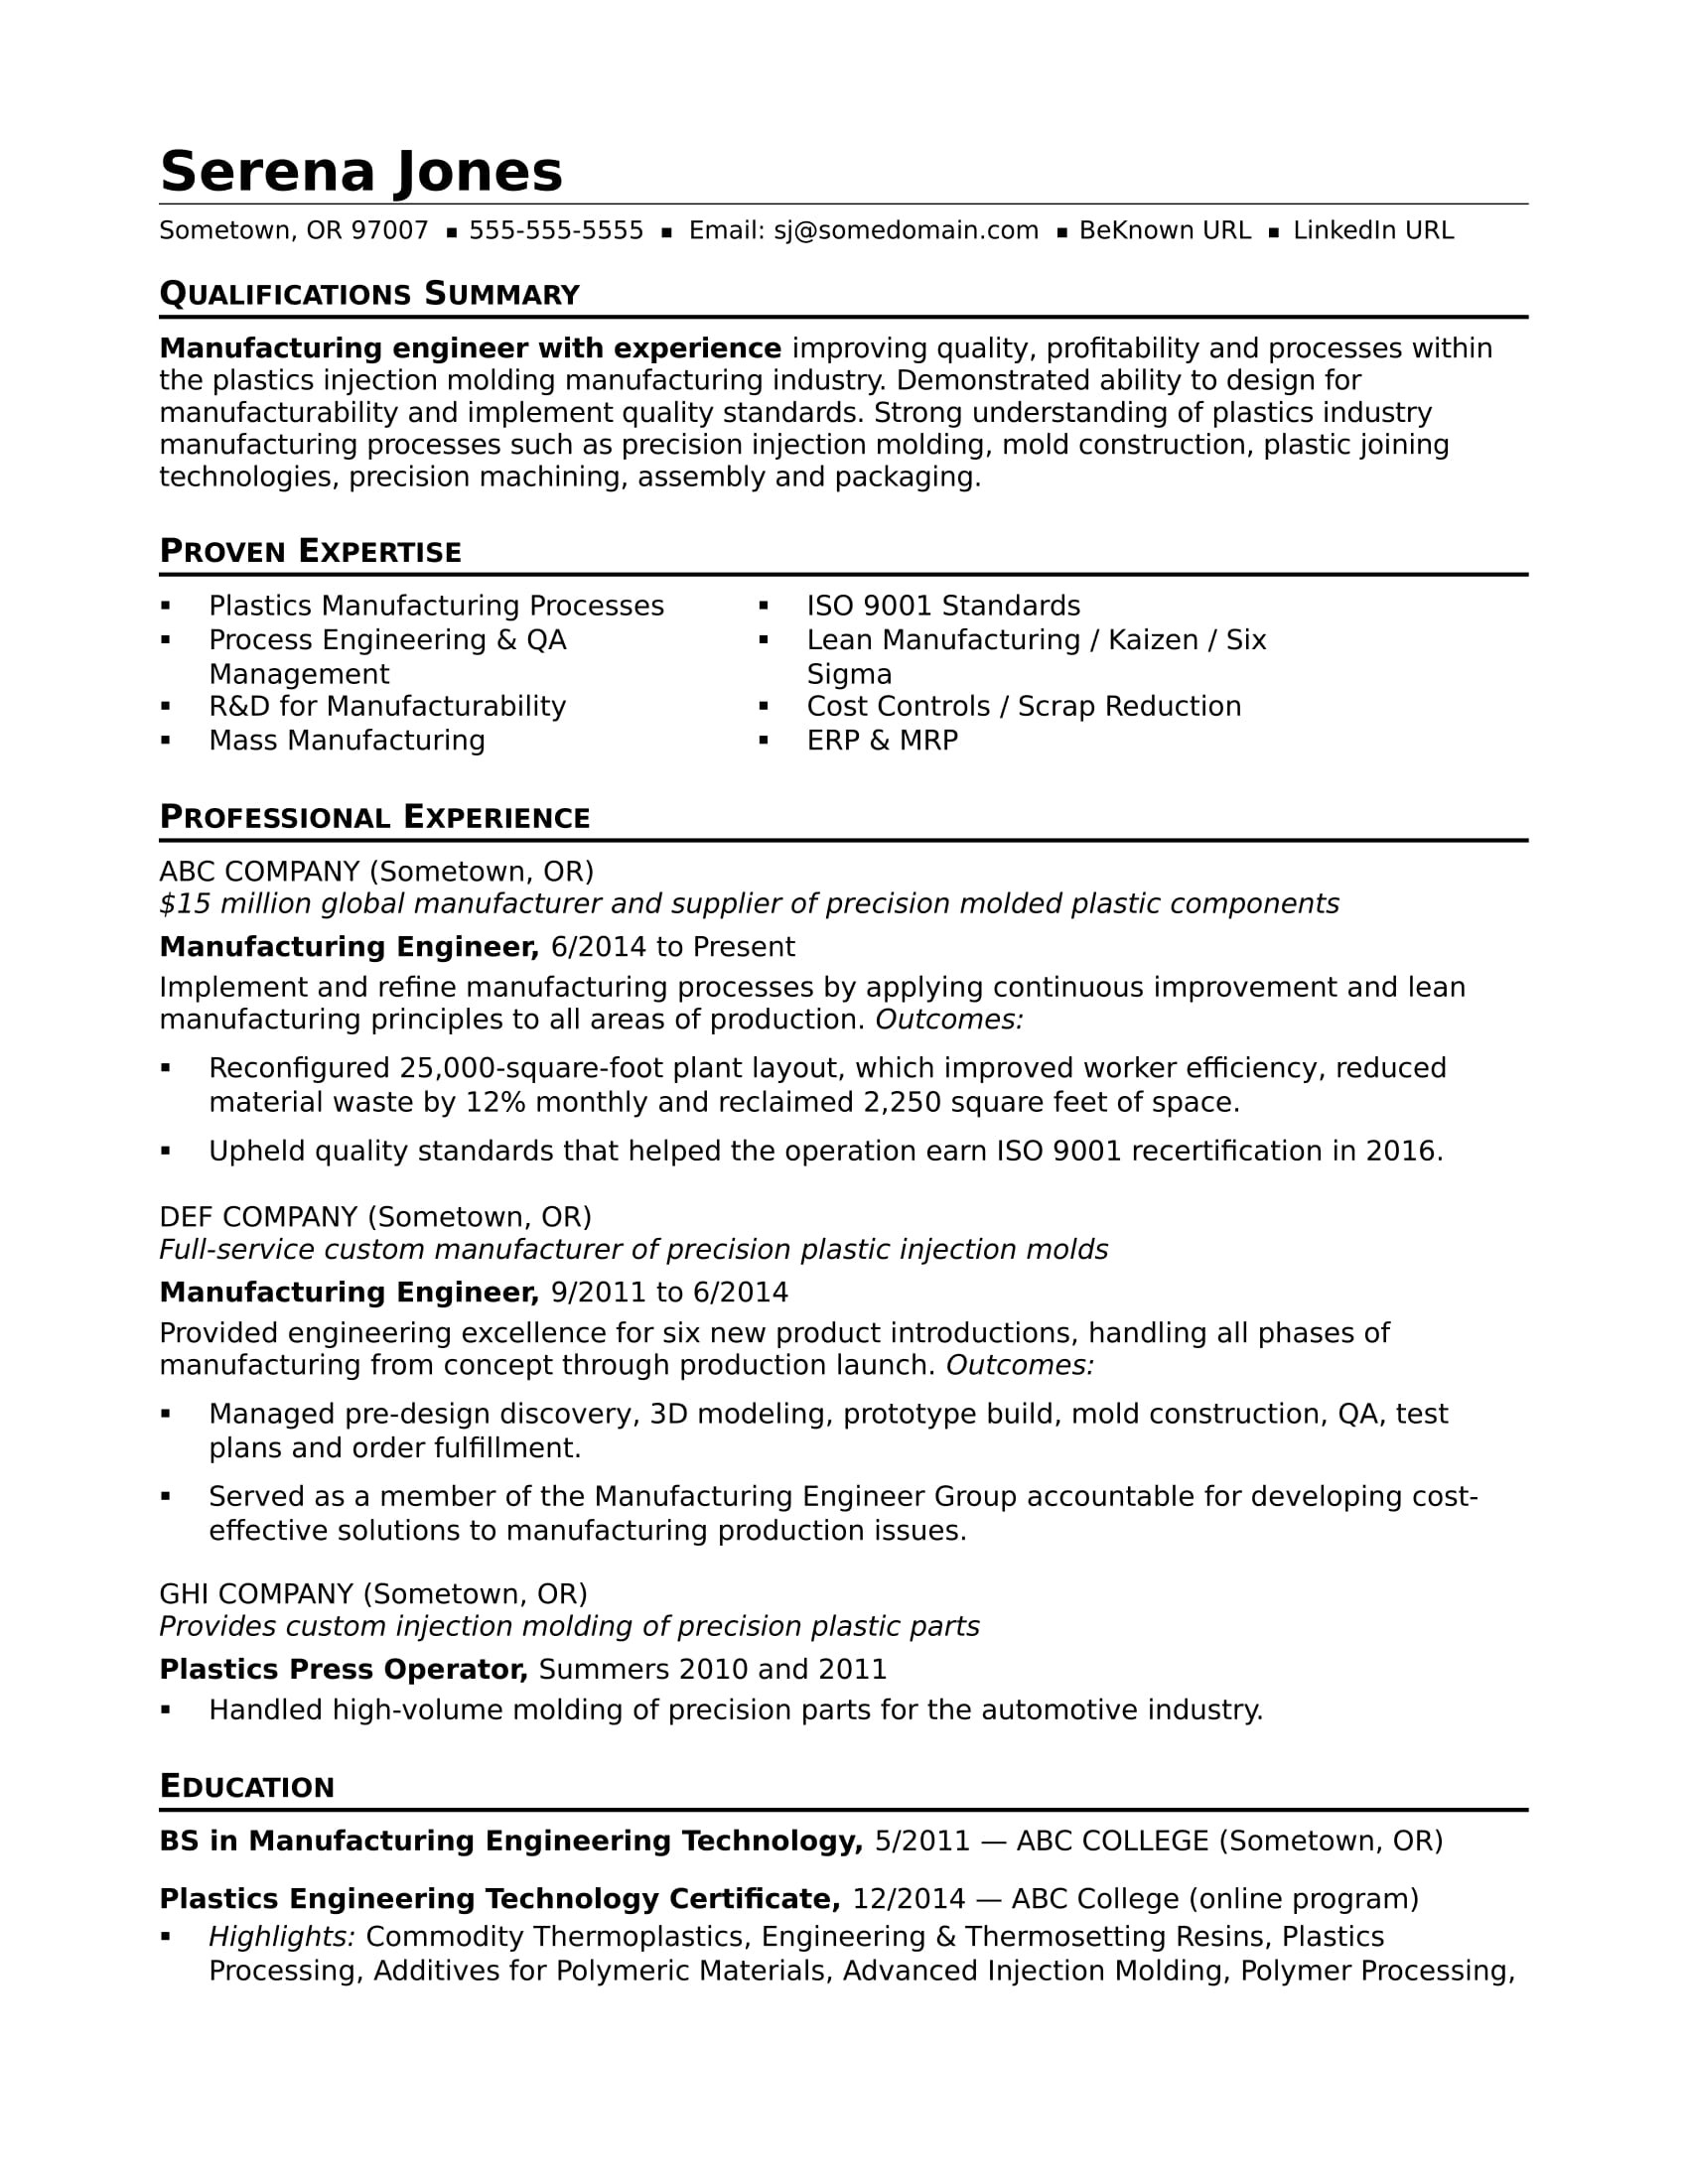 Sample Resume for Entry Manufacturing Engineer Manufacturing Engineer Resume Sample Monster.com